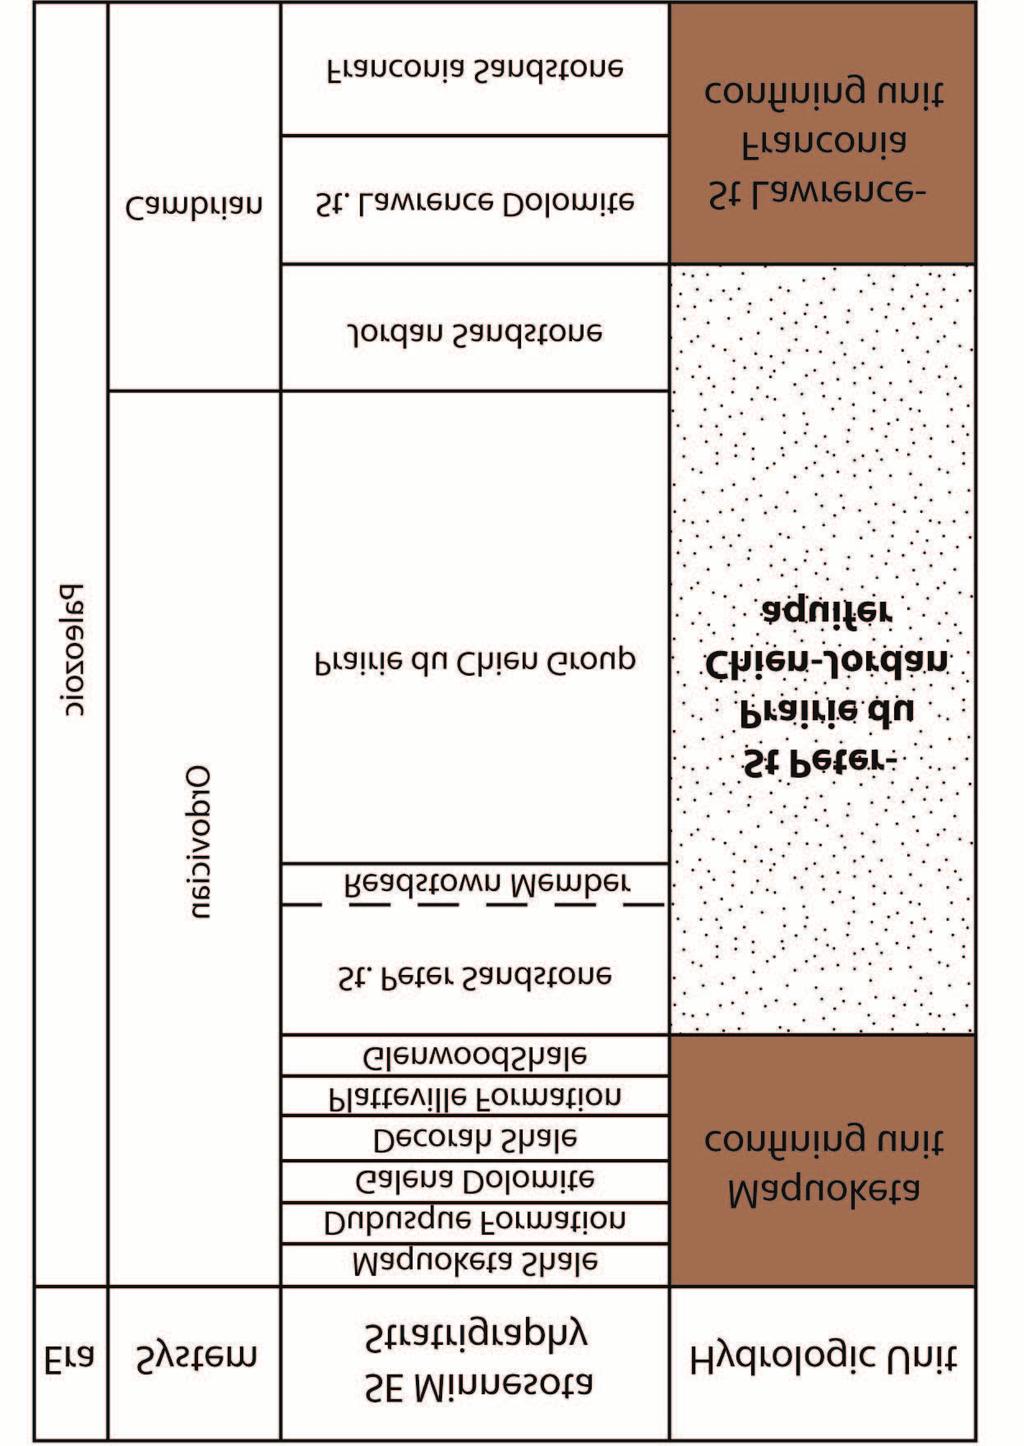 Figure 5. Diagram showing the stratigraphy of Southeastern Minnesota in during the Cambrian and Ordovician systems.